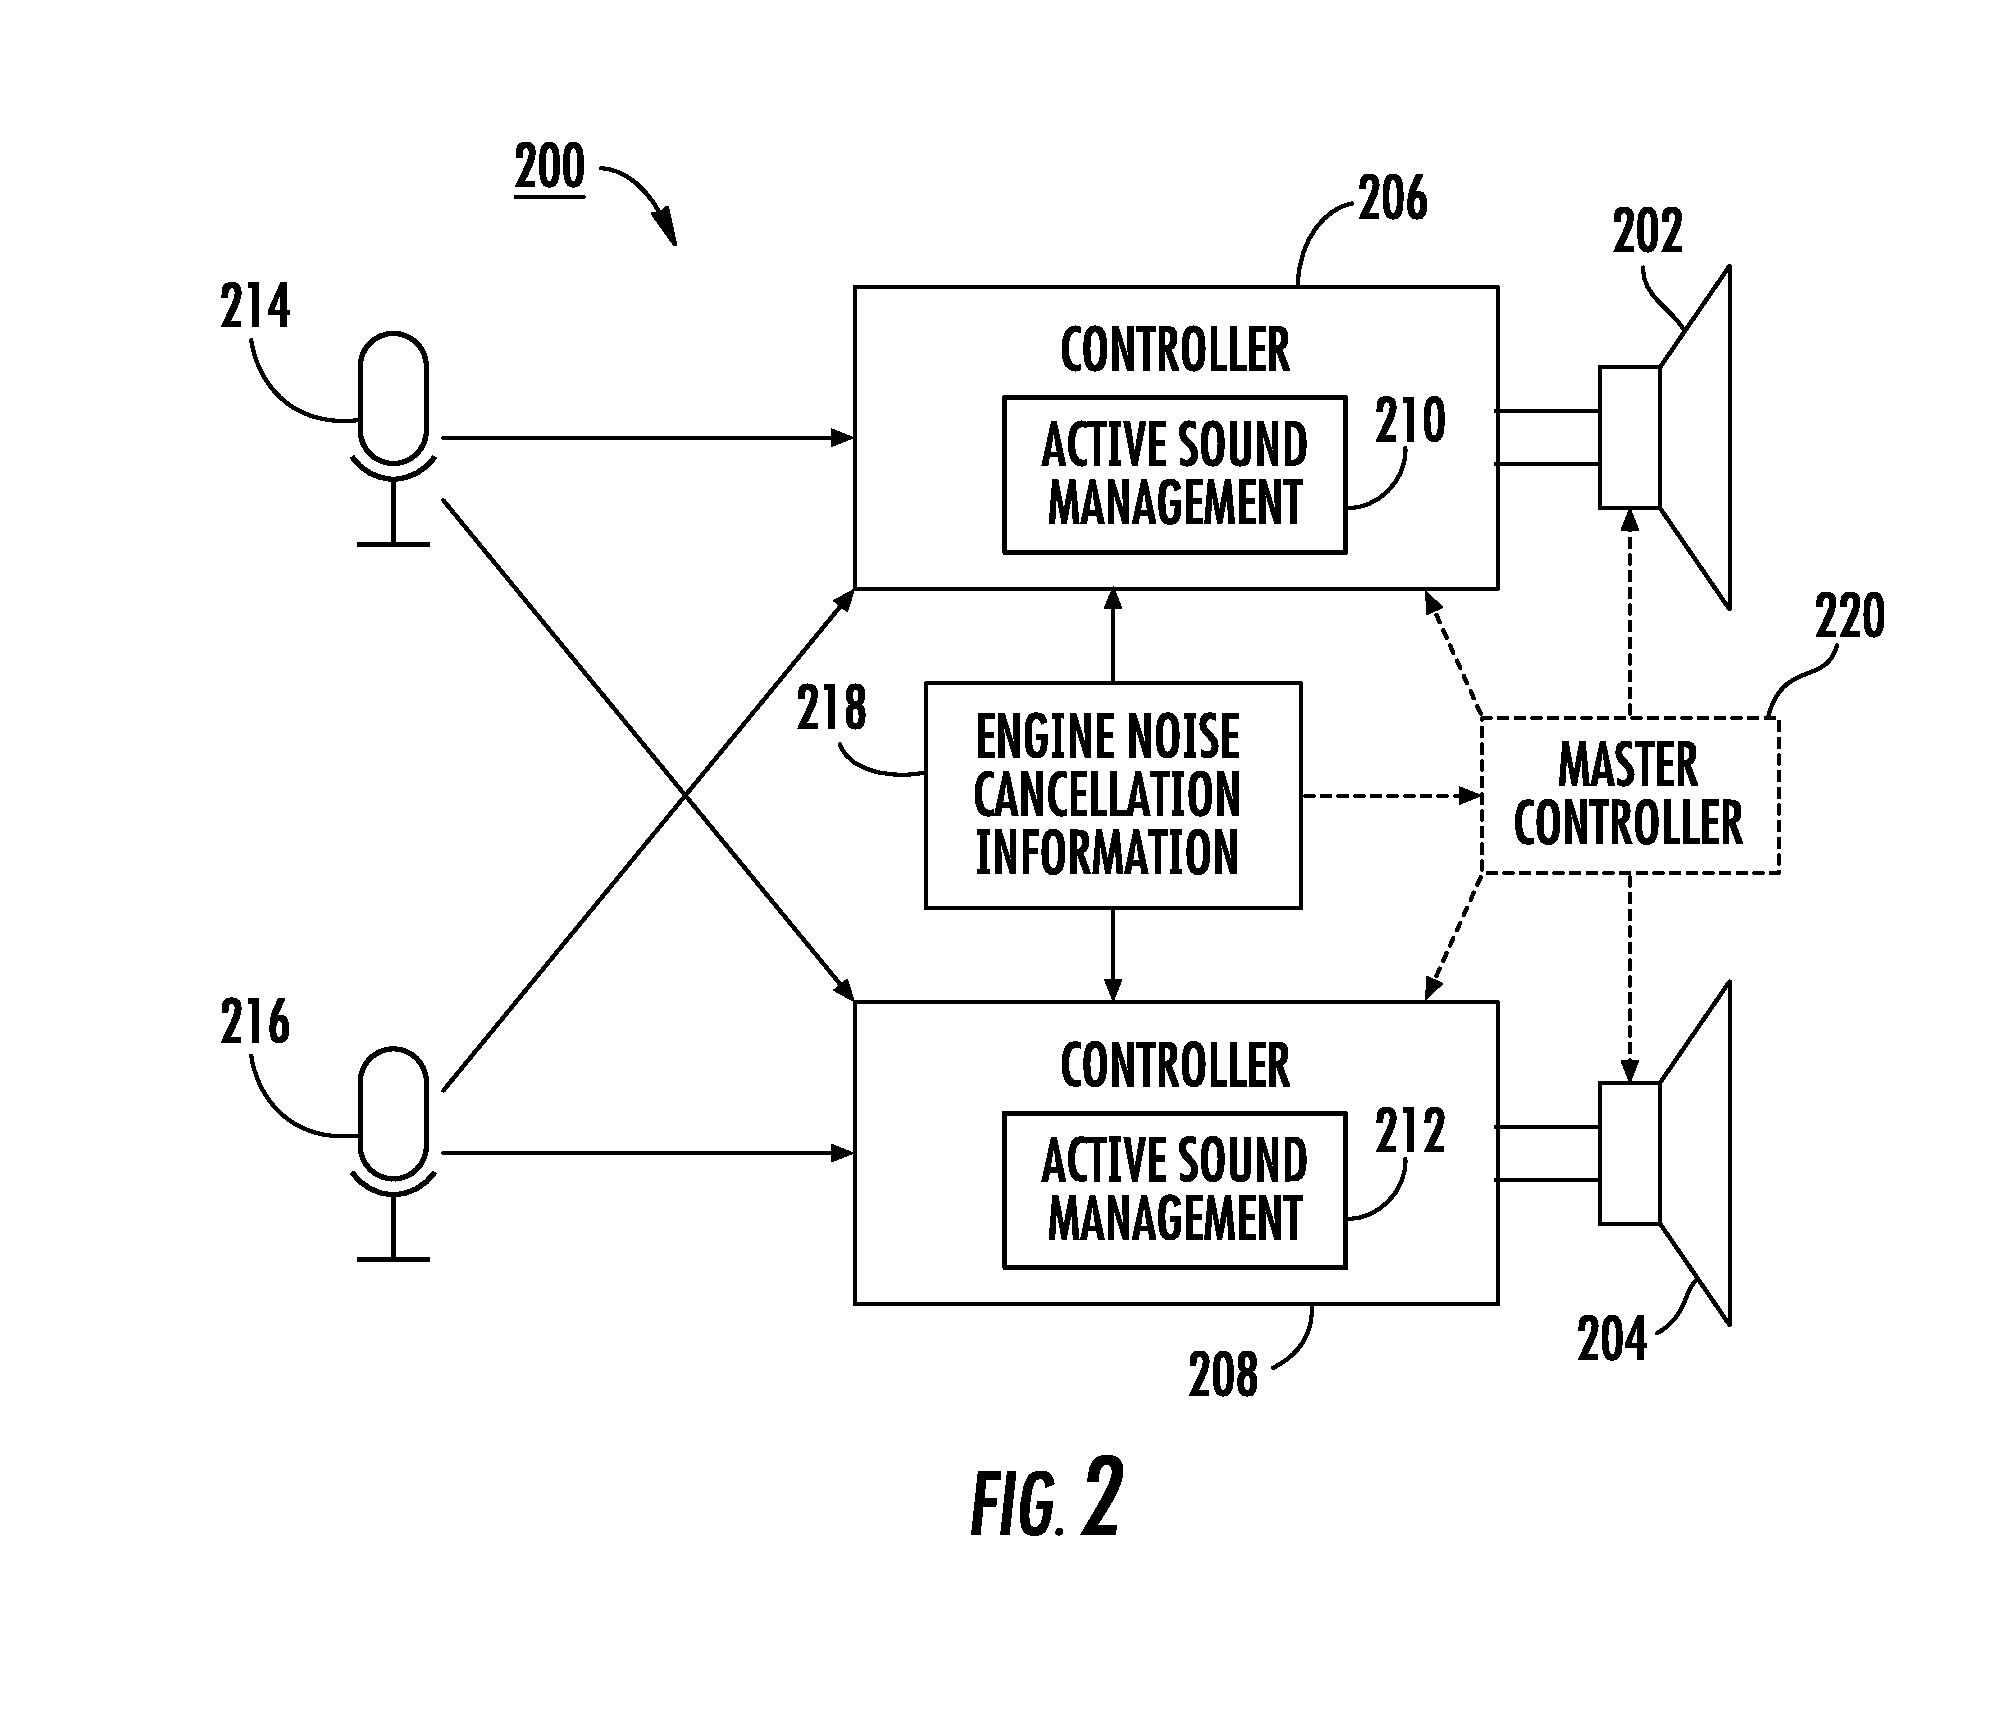 Forward Speaker Noise Cancellation In a Vehicle